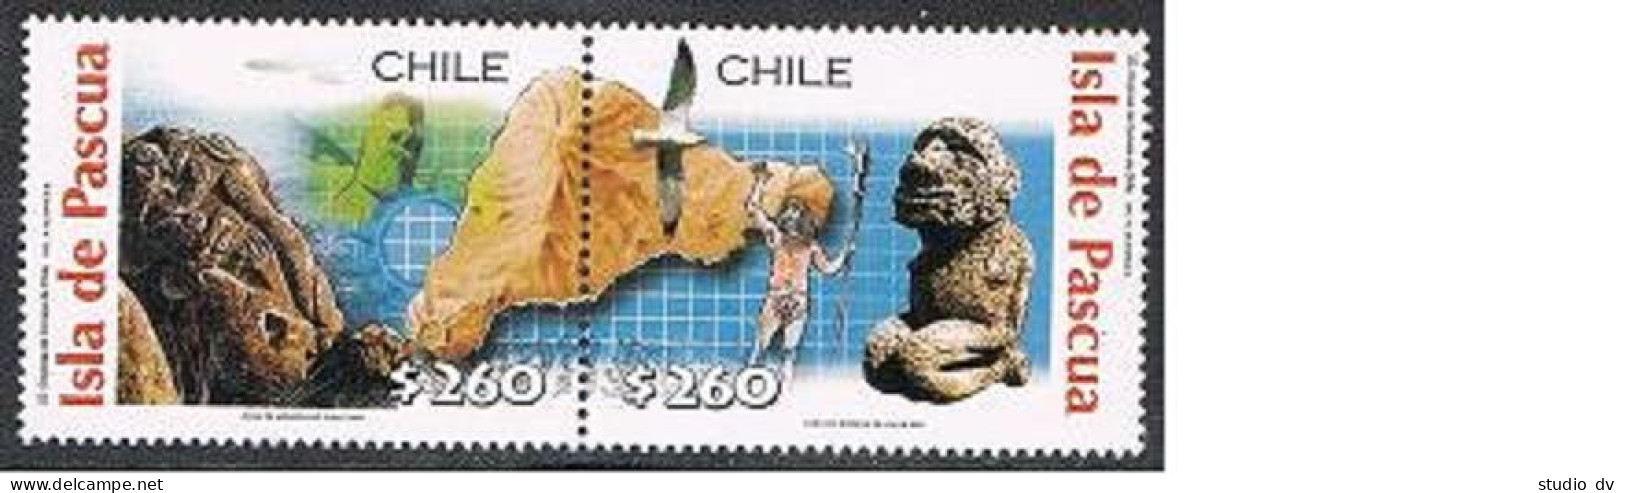 Chile 1361 Pair-label, MNH. Easter Island 2001. Bird, Artifact, Map.  - Chile